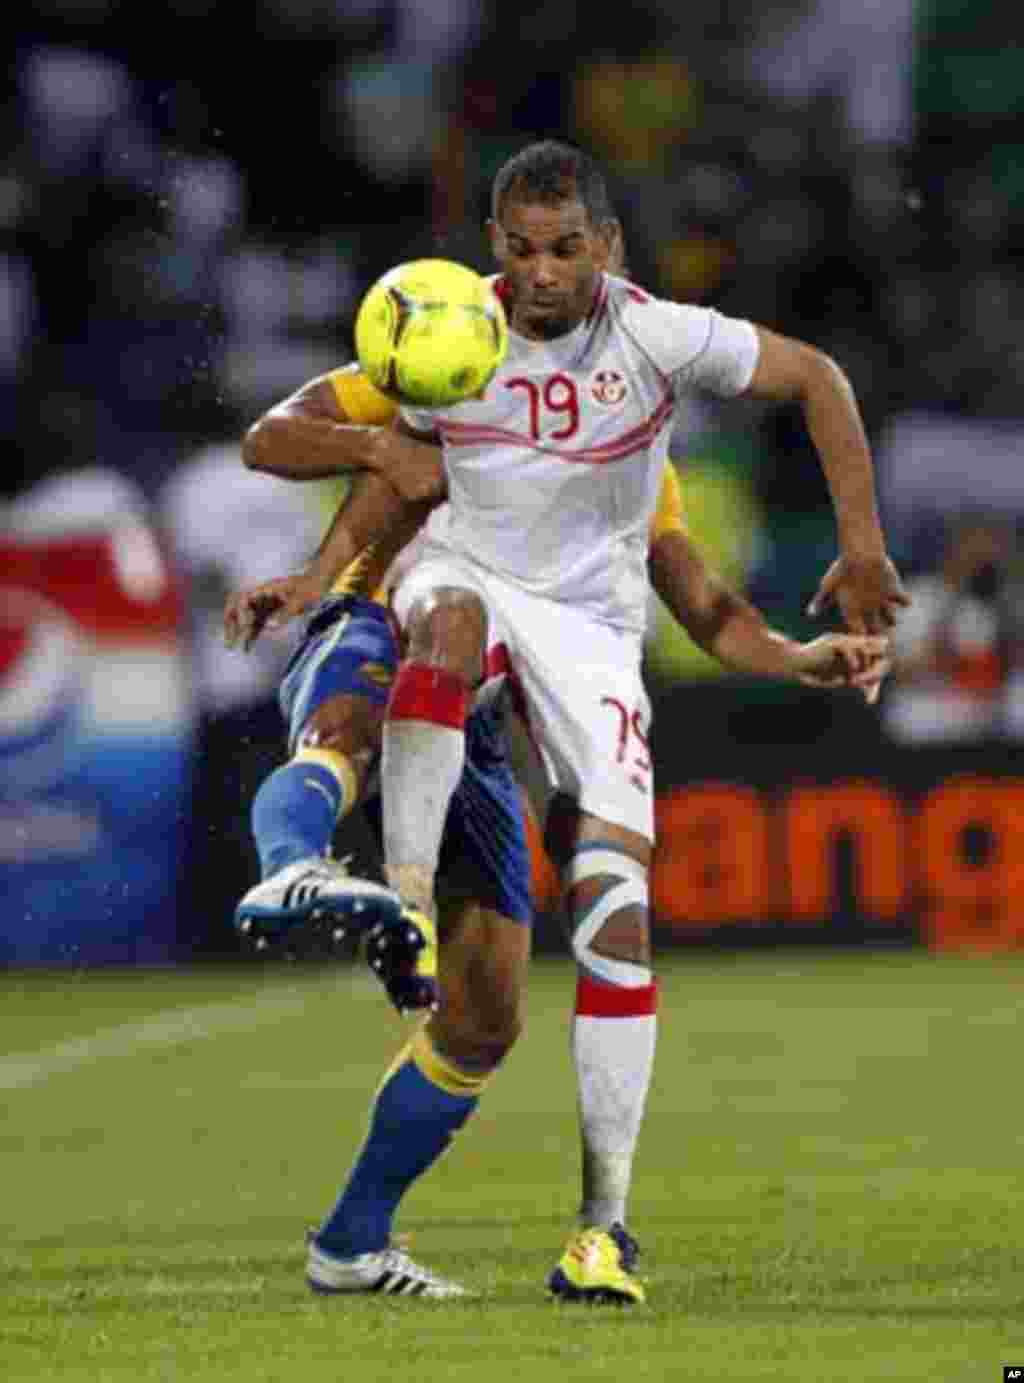 Tunisia's Sabeur Khalifa (front) challenges Lloyd Palun of Gabon during their African Cup of Nations Group C soccer match at Franceville stadium in Gabon January 31, 2012.